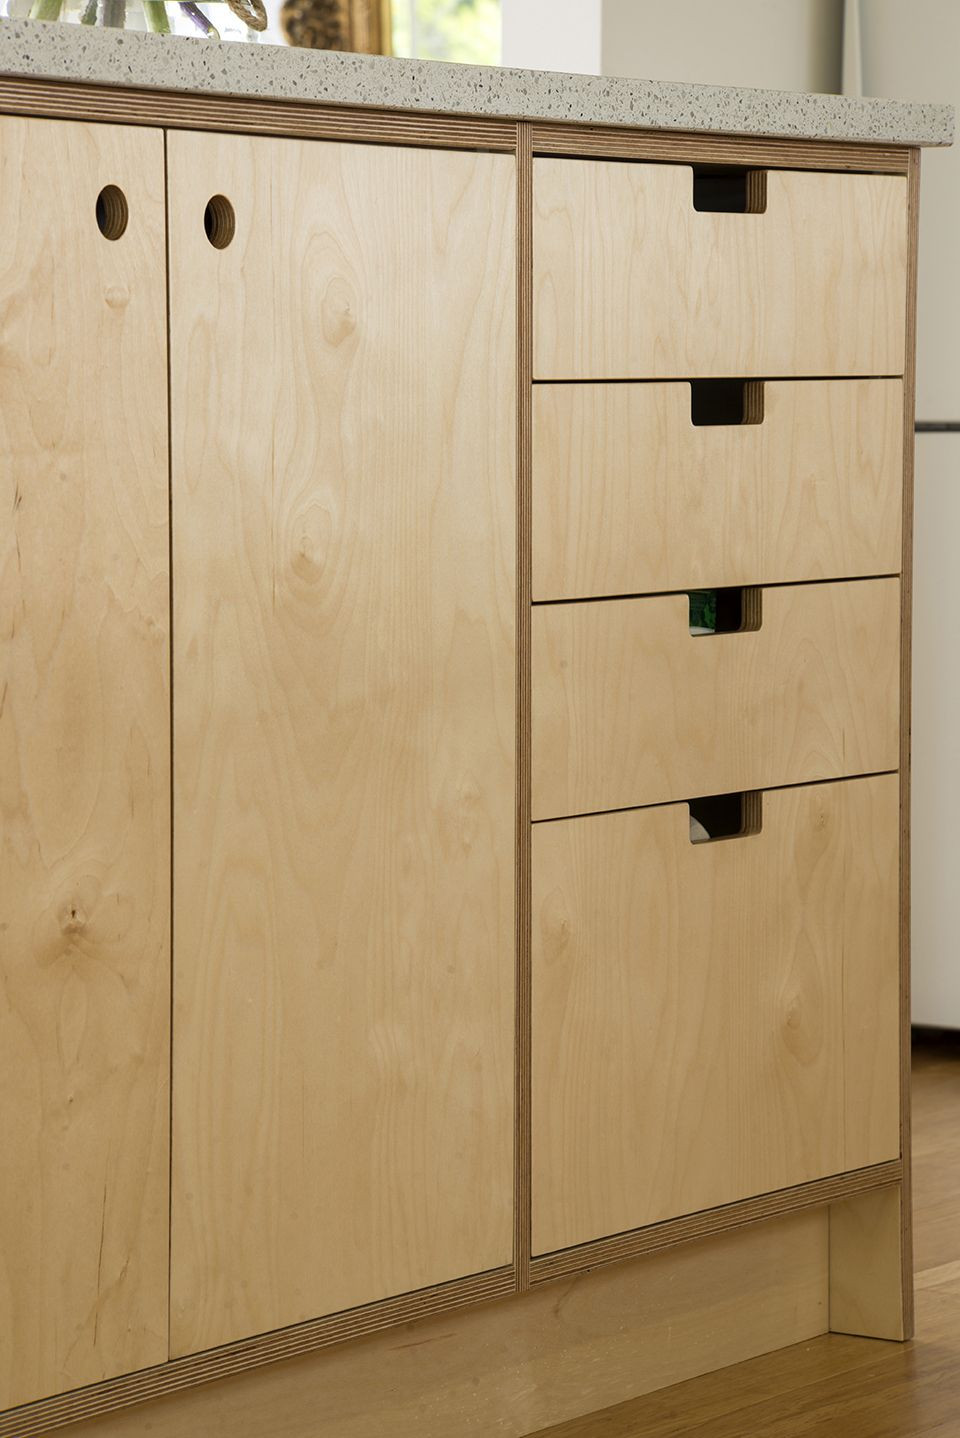 Plywood Cabinet Doors DIY
 Plywood is emerging as a must have for interiors Using